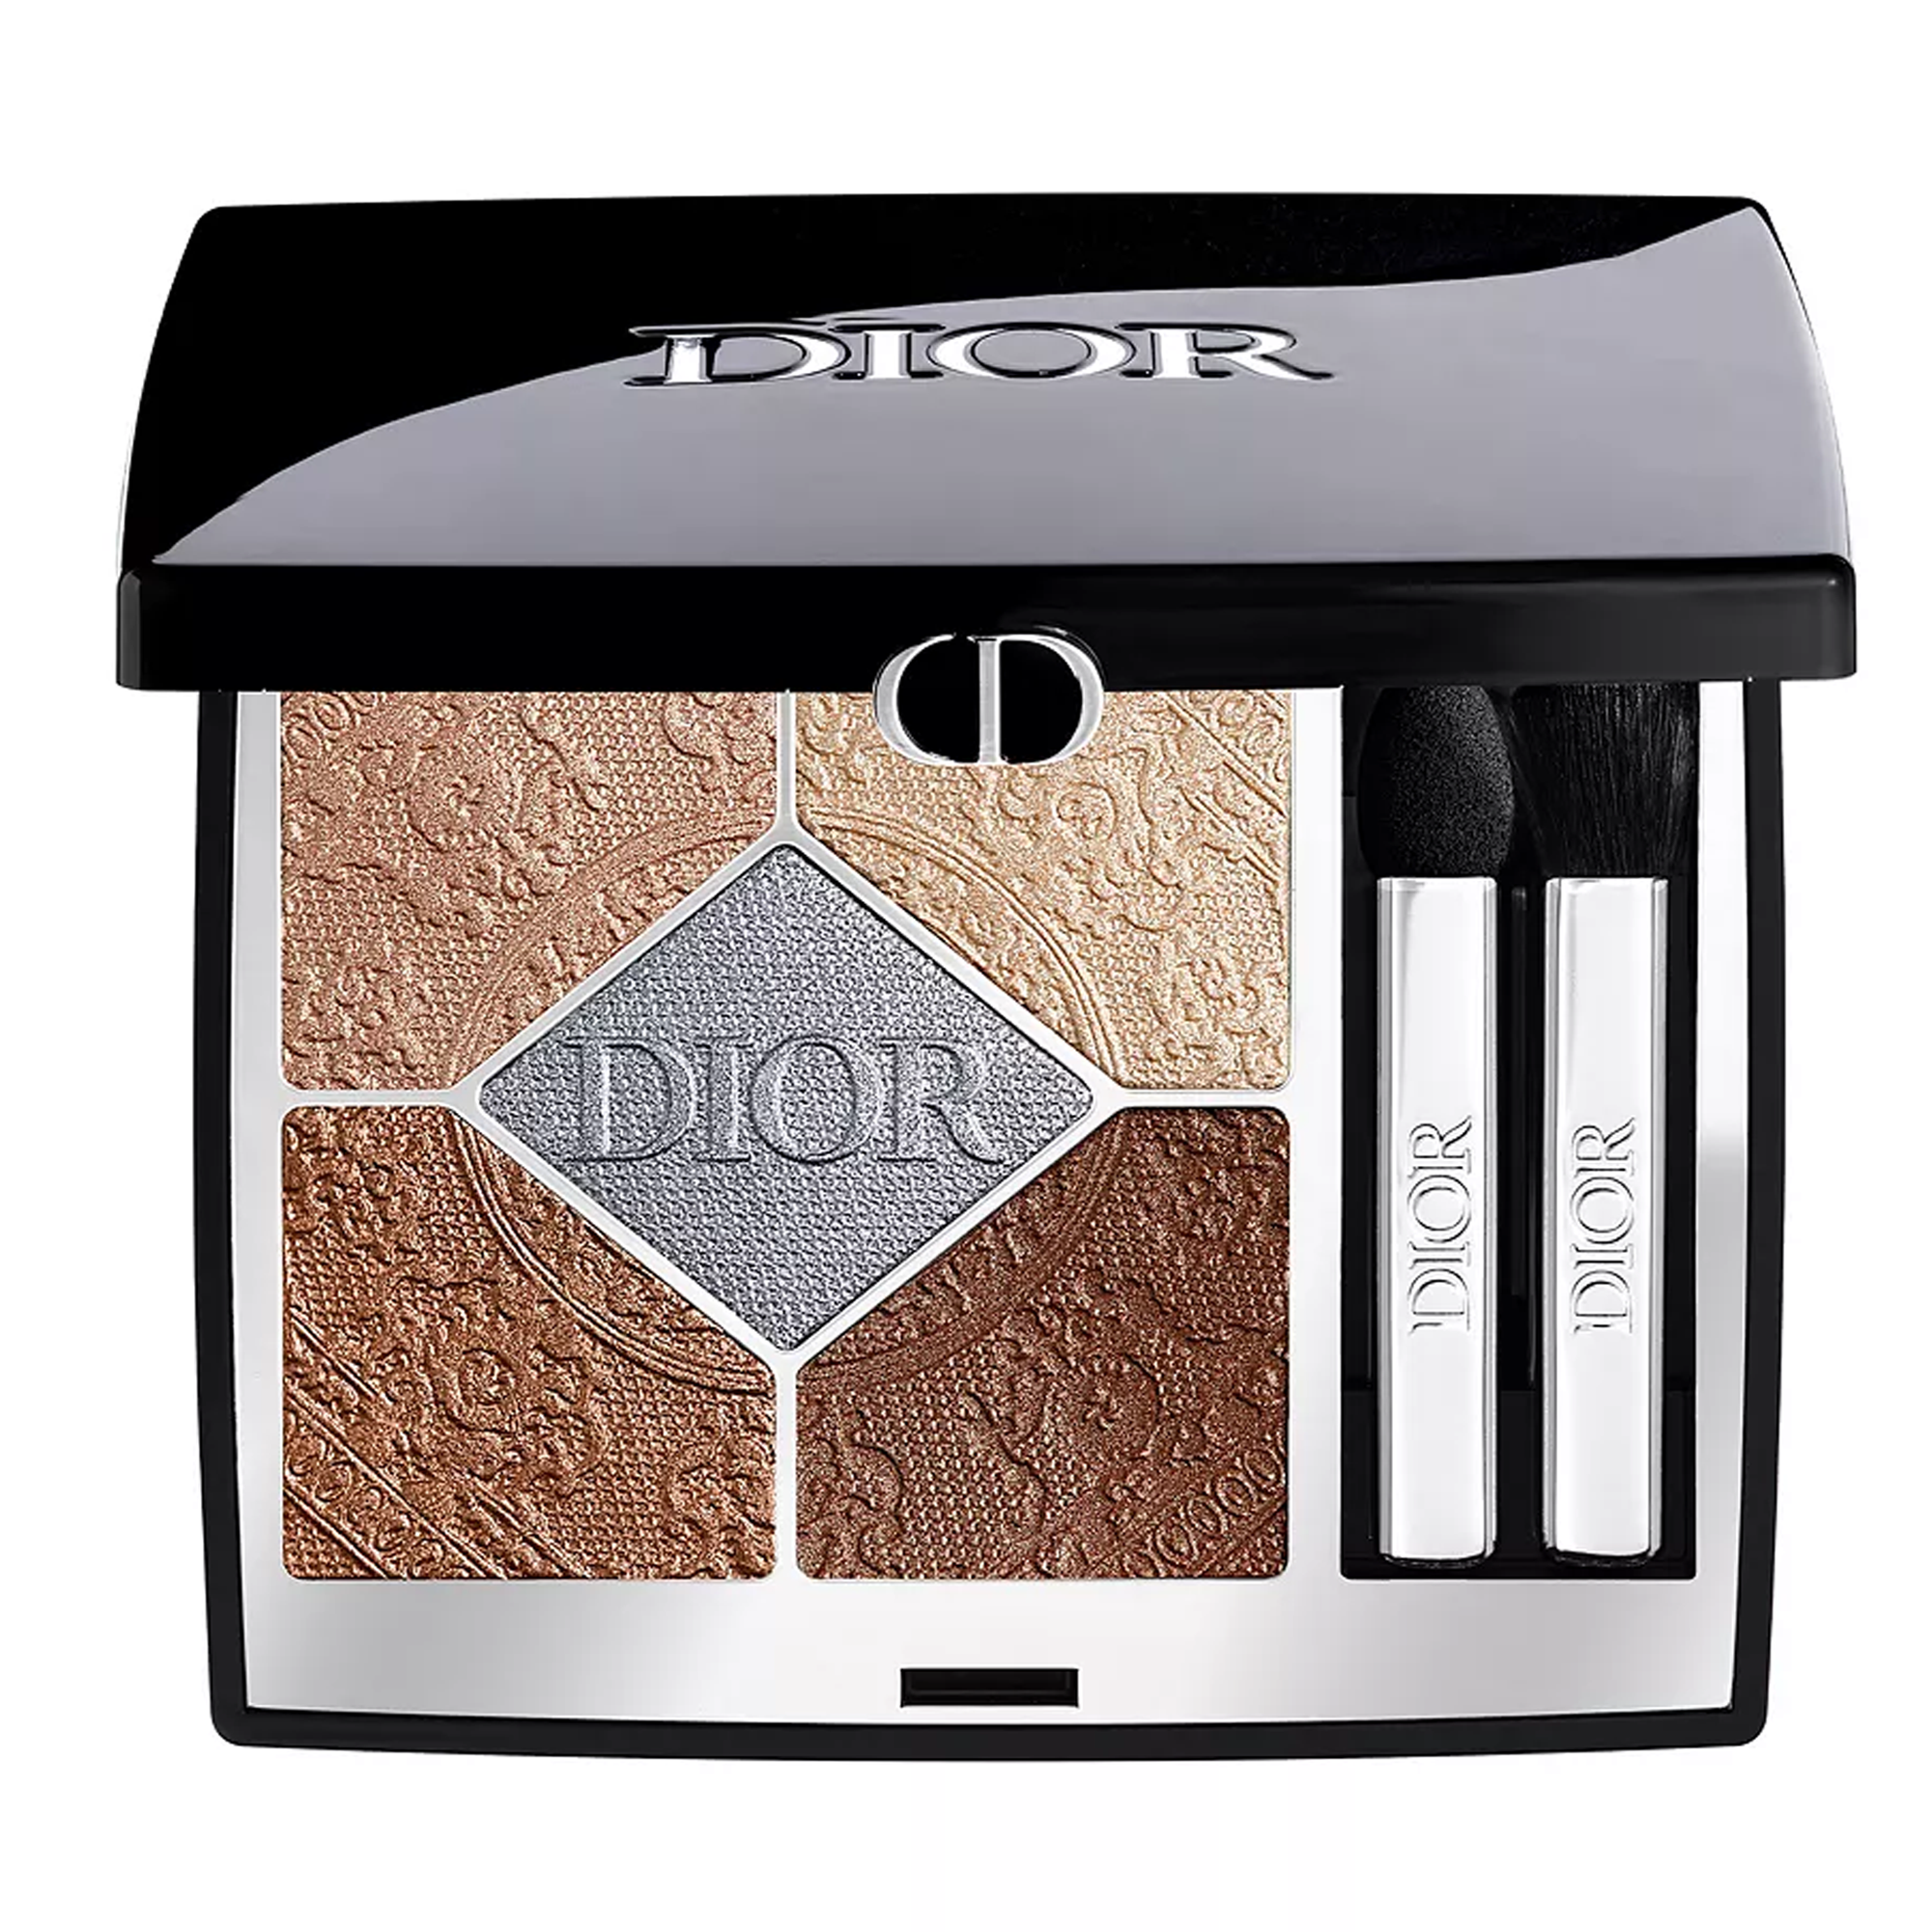 Diorshow Holiday 5-Color Eyeshadow Palette